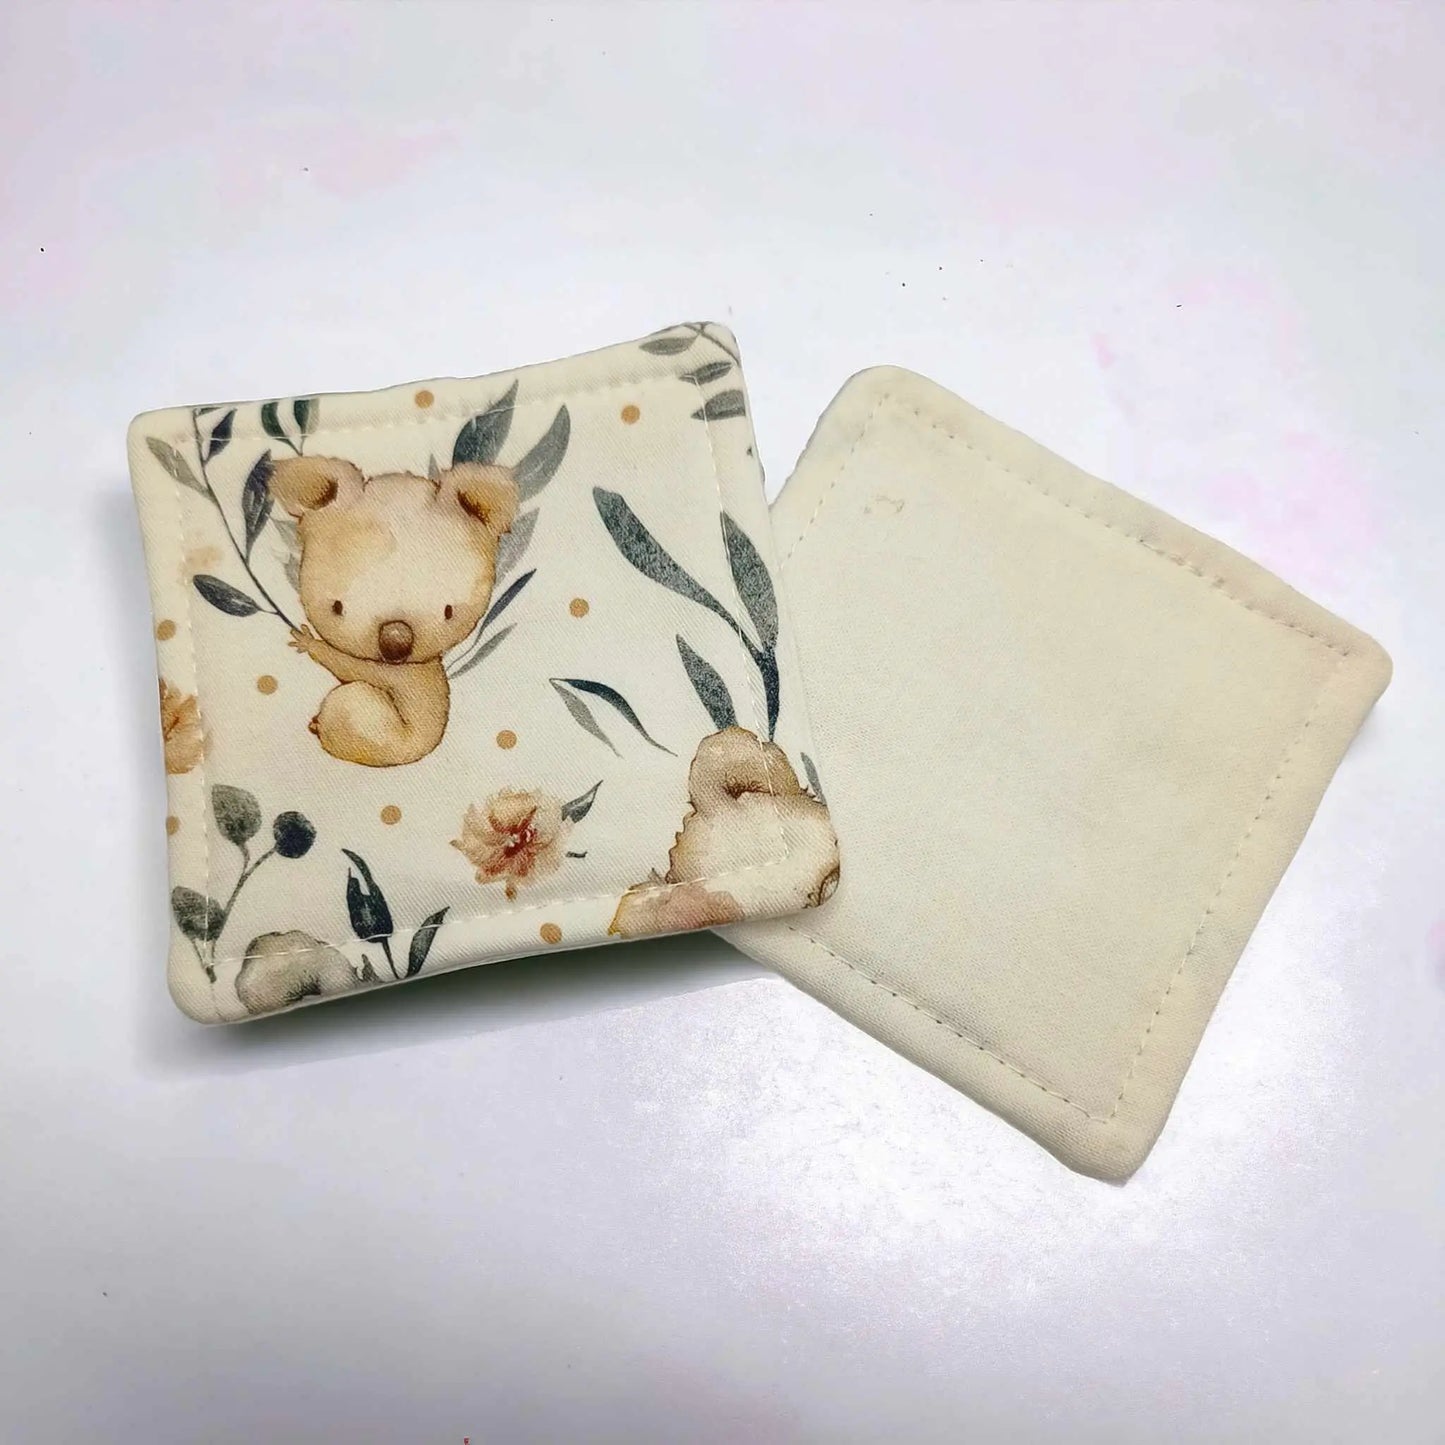 Reusable Makeup Remover Pads, Eco Friendly Cosmetic Wipes, Made in Australia - Image #4